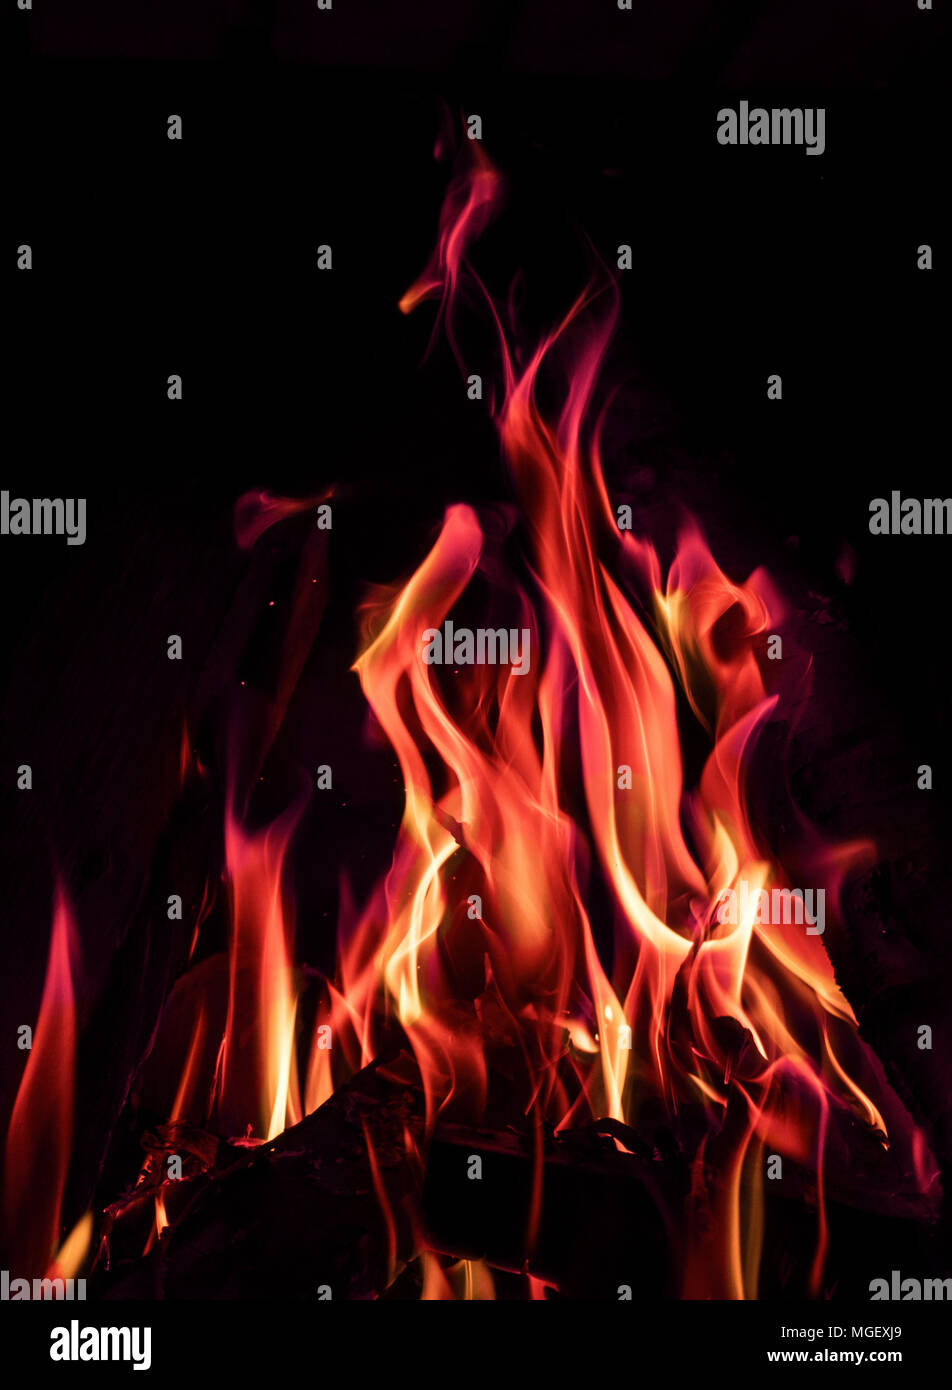 Red, orange and blue fire flames on black background Stock Photo - Alamy